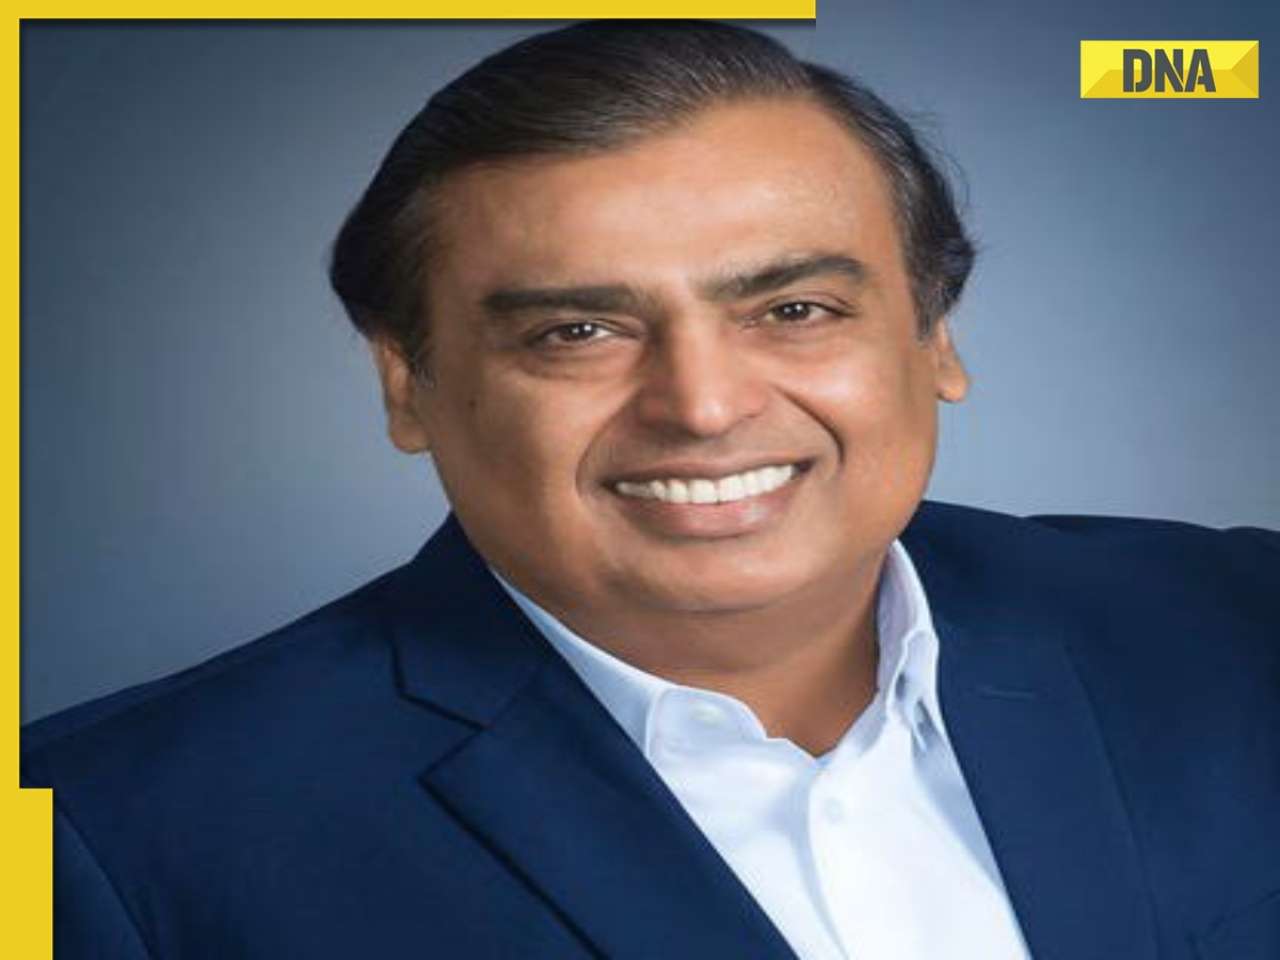 Mukesh Ambani lost 15 kgs without any workout, his secret diet plan includes...